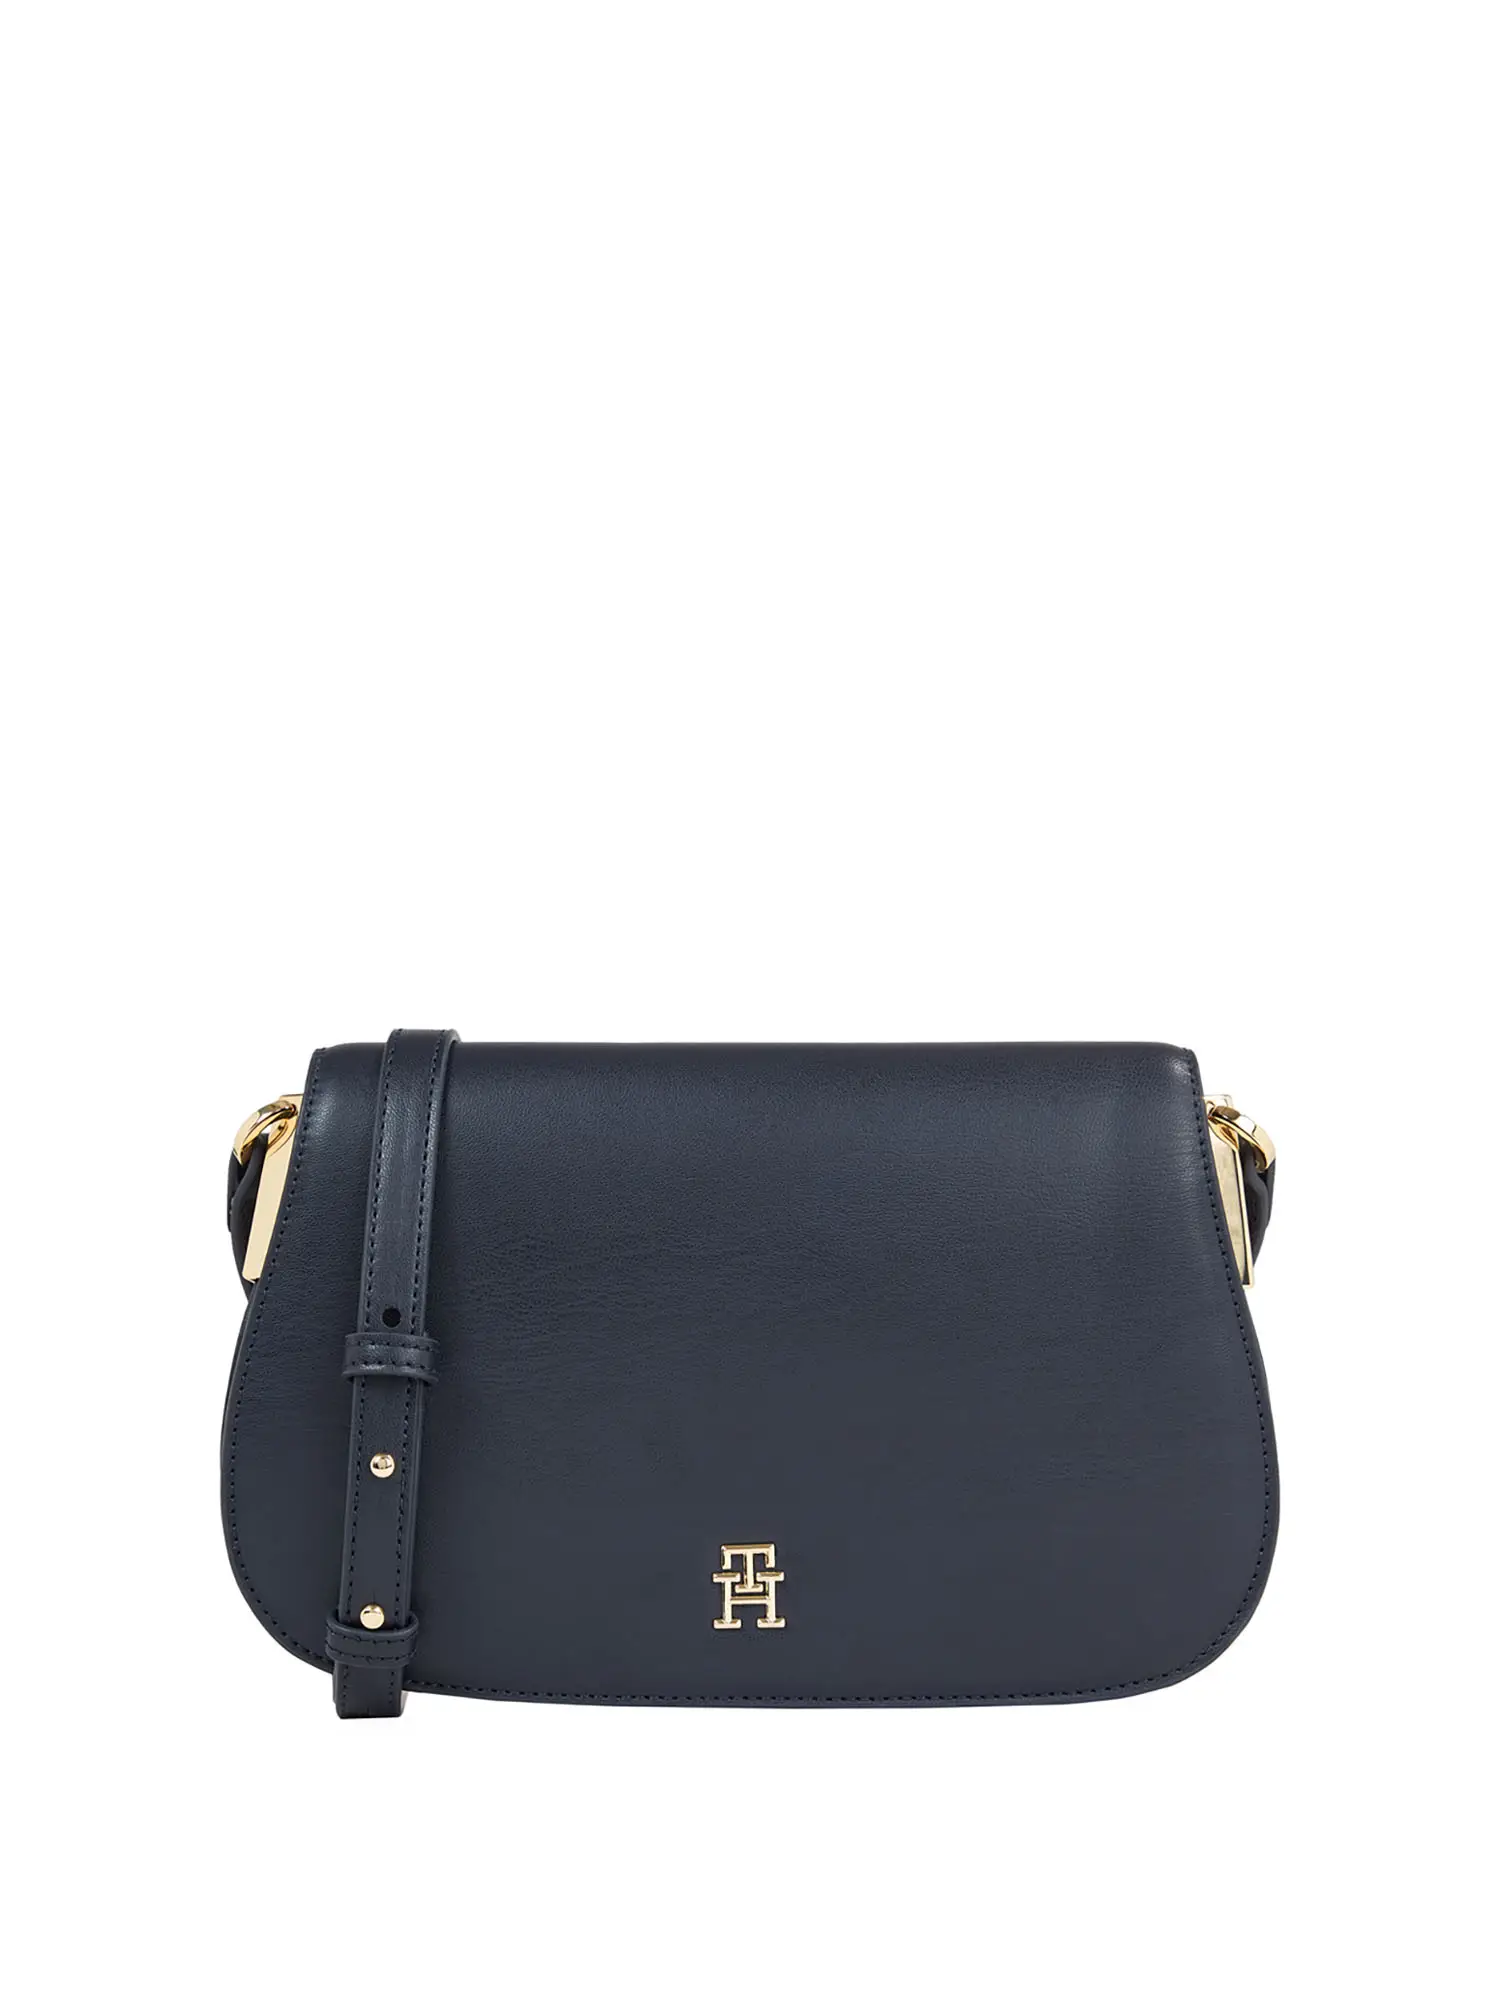 TRACOLLA DONNA - TOMMY HILFIGER - AW0AW15974 - BLU, UNICA